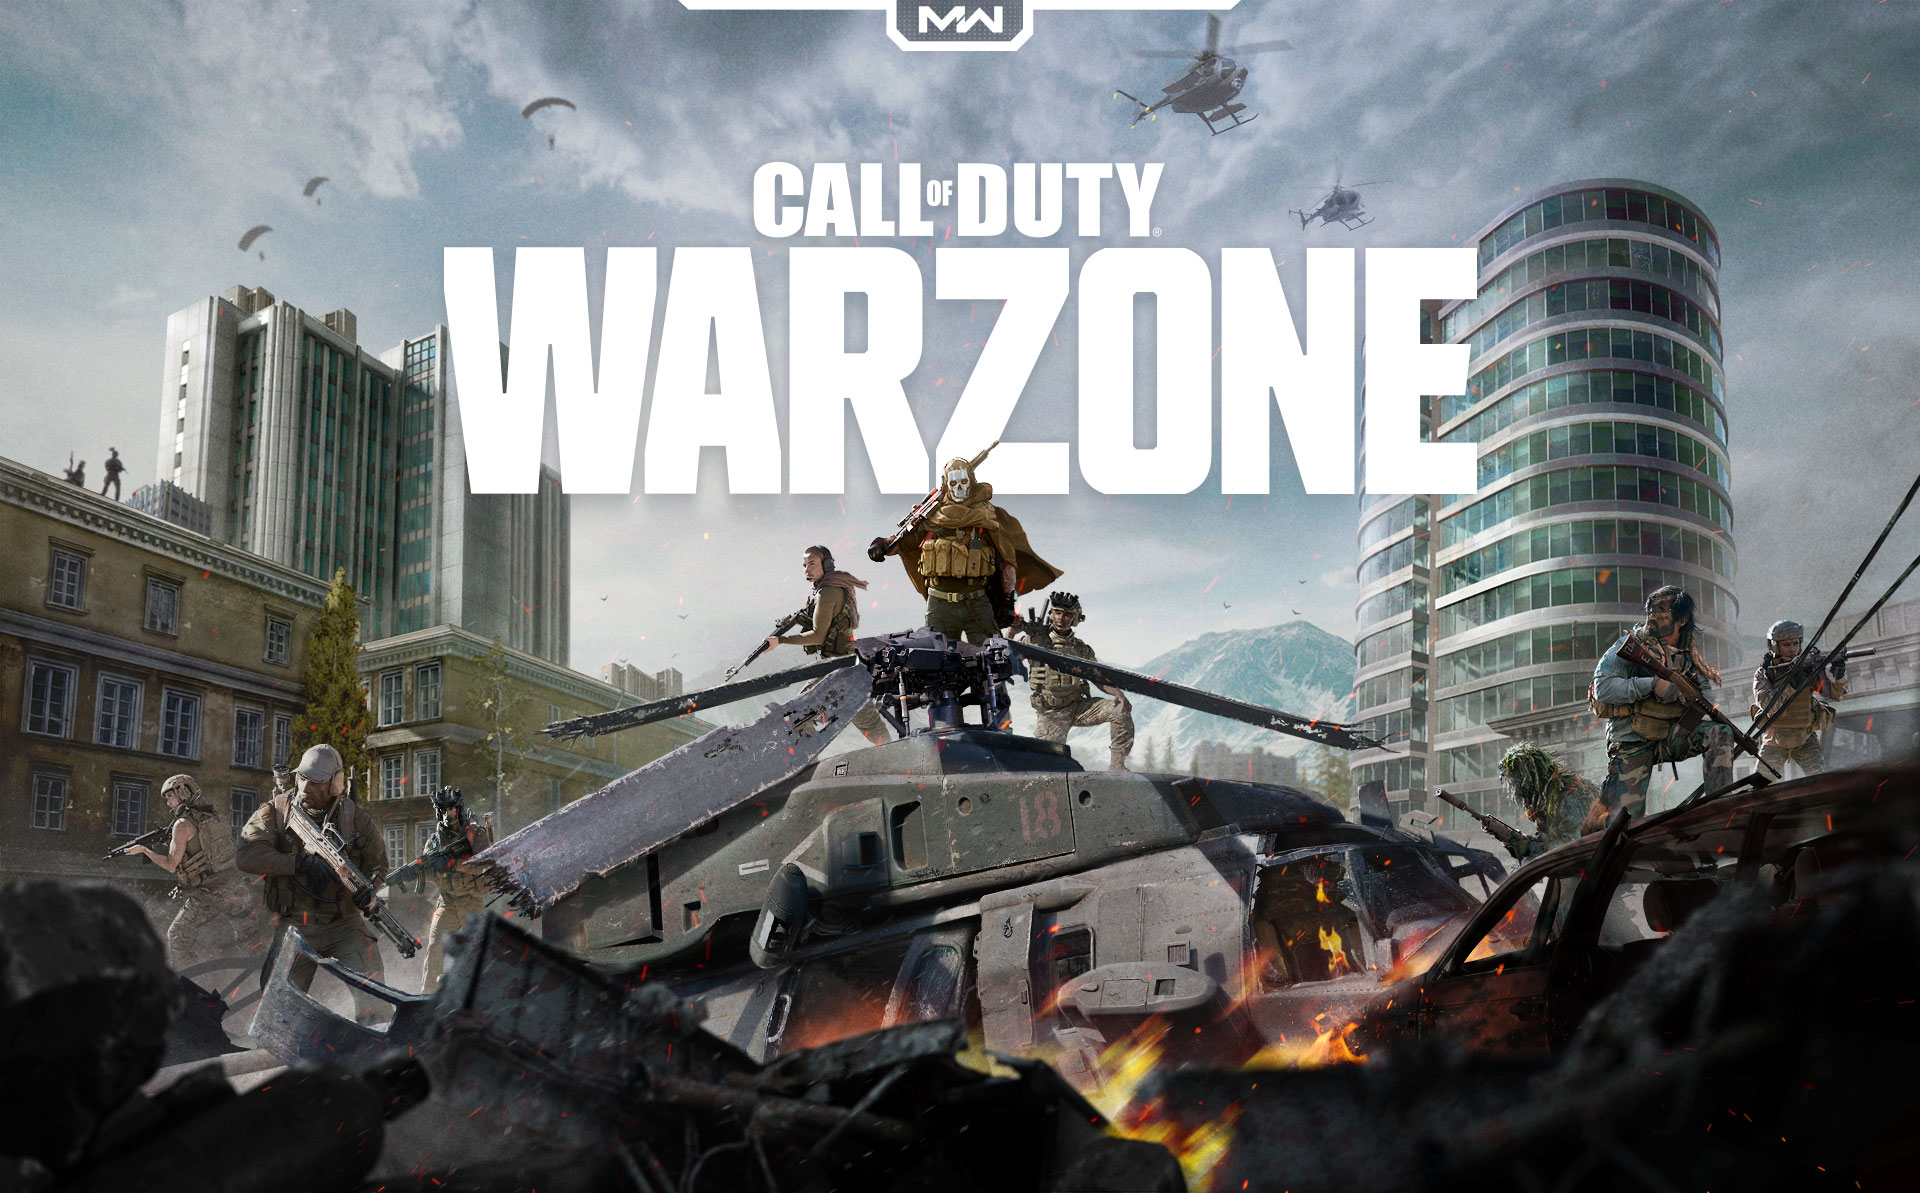 Call Of Duty Warzone, Call Of Duty Battle Royale, Call Of Duty Free to Play, Call Of Duty Warzone Gameplay, Call Of Duty Warzone Combat Pack